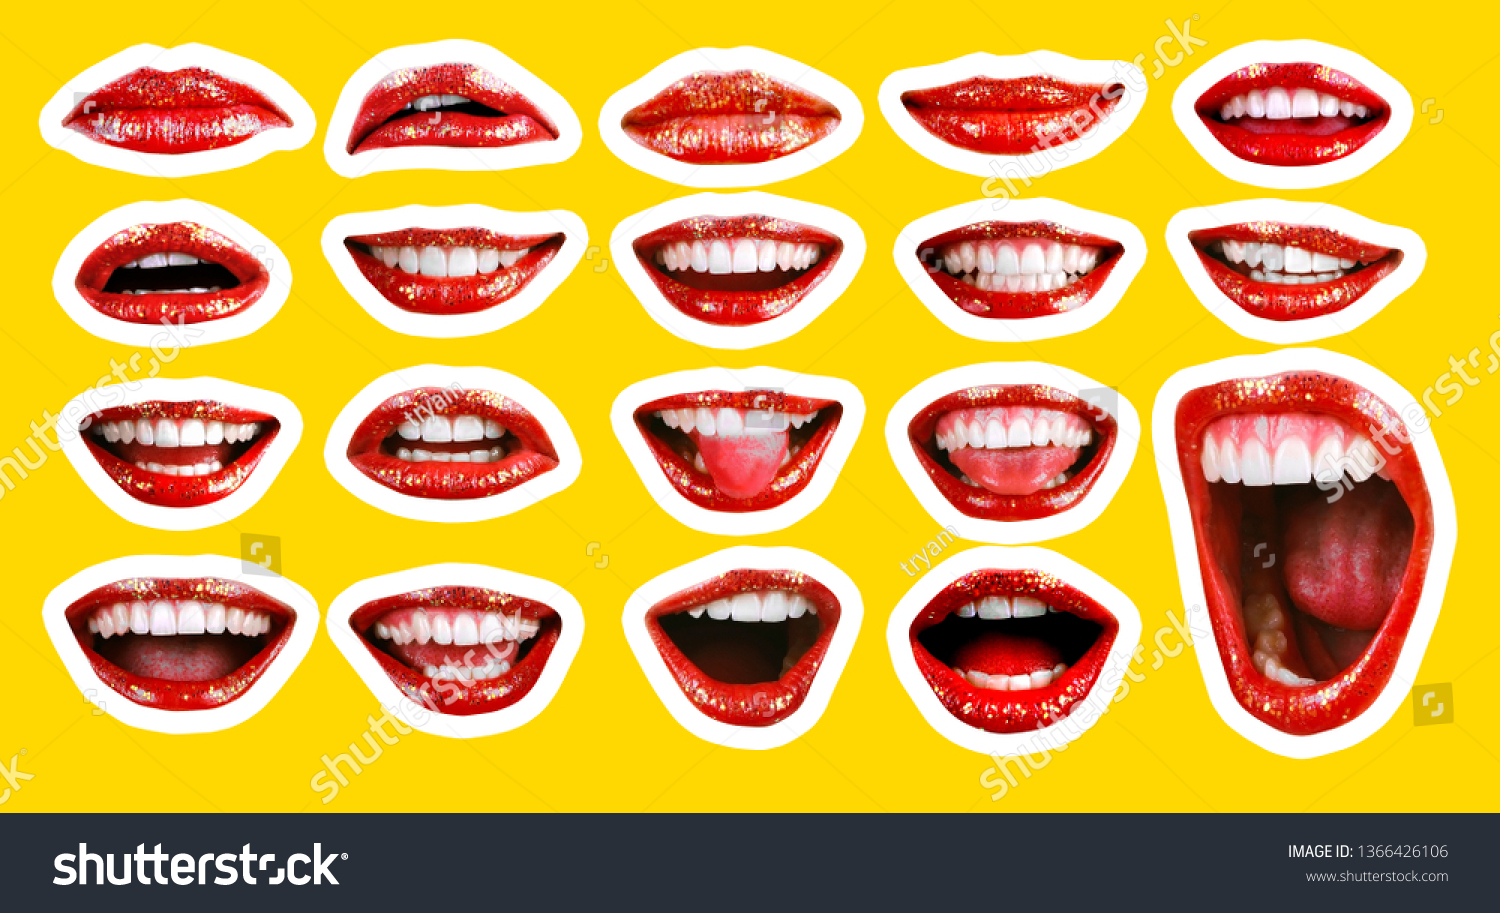 Collage in magazine style with emotional woman's lip gestures set. Girl mouth close up with lipstick makeup expressing different emotions. Black and white toned sunny summer colorful yellow background #1366426106